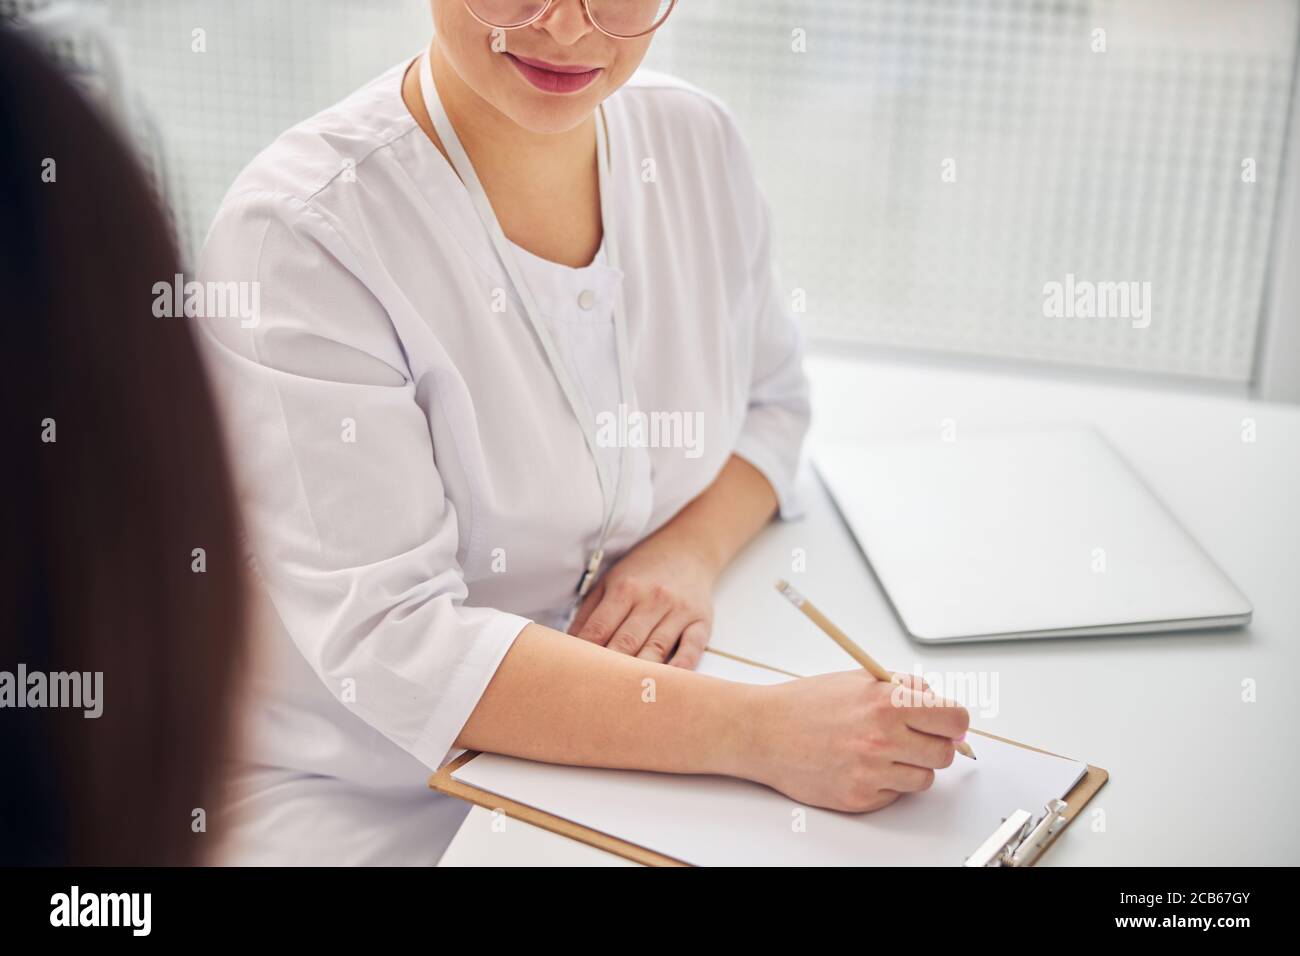 Doctor with a pencil listening to her patient Stock Photo